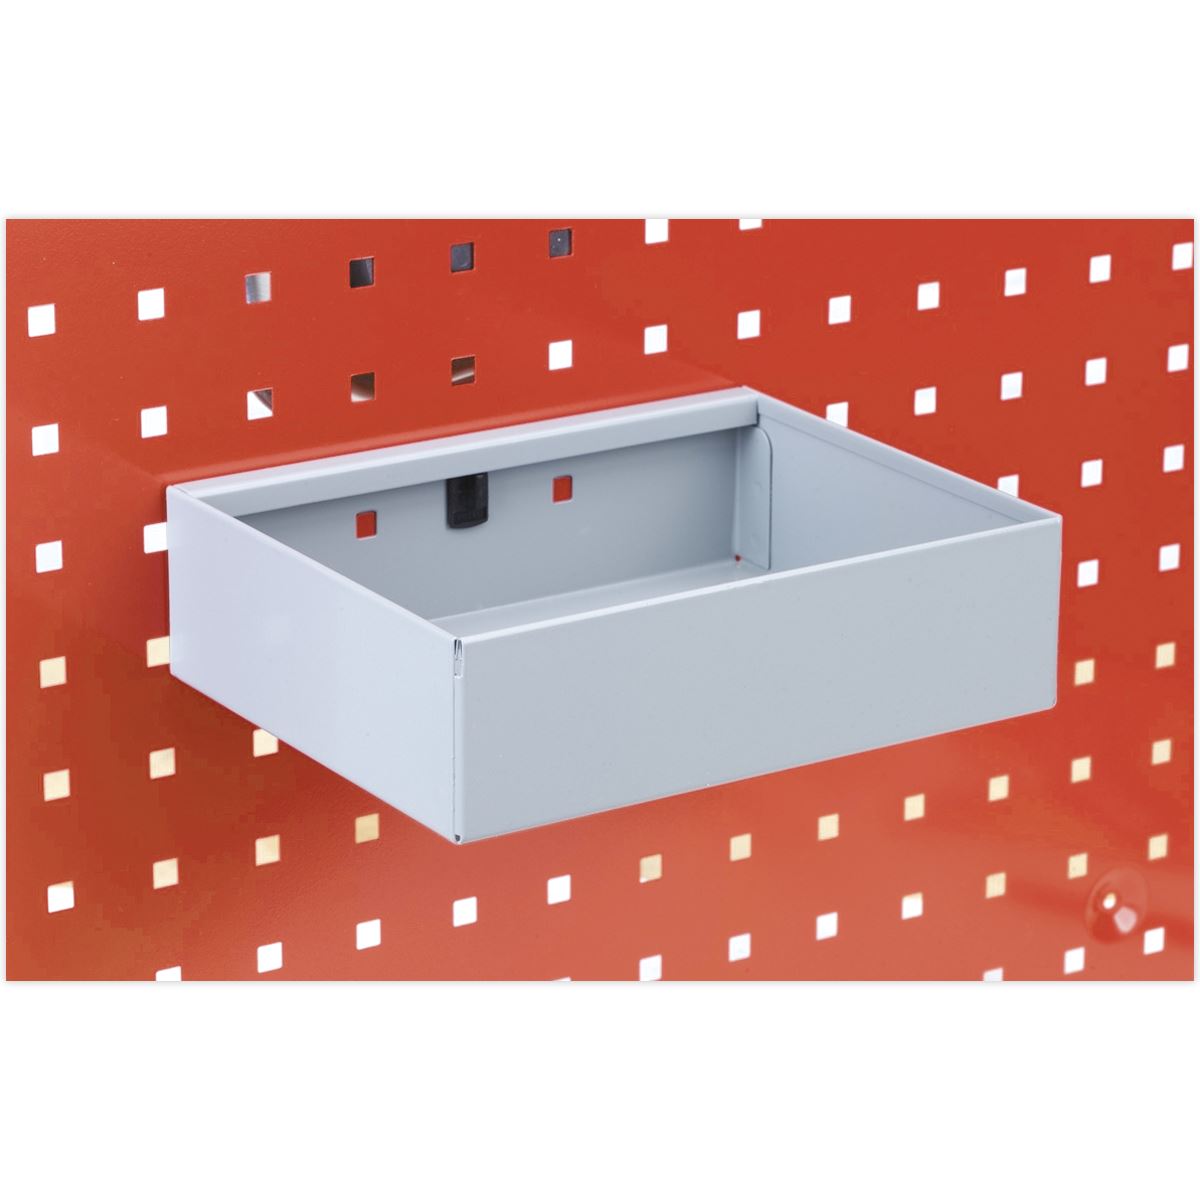 Sealey Storage Tray for PerfoTool/Wall Panels 225 x 175 x 65mm